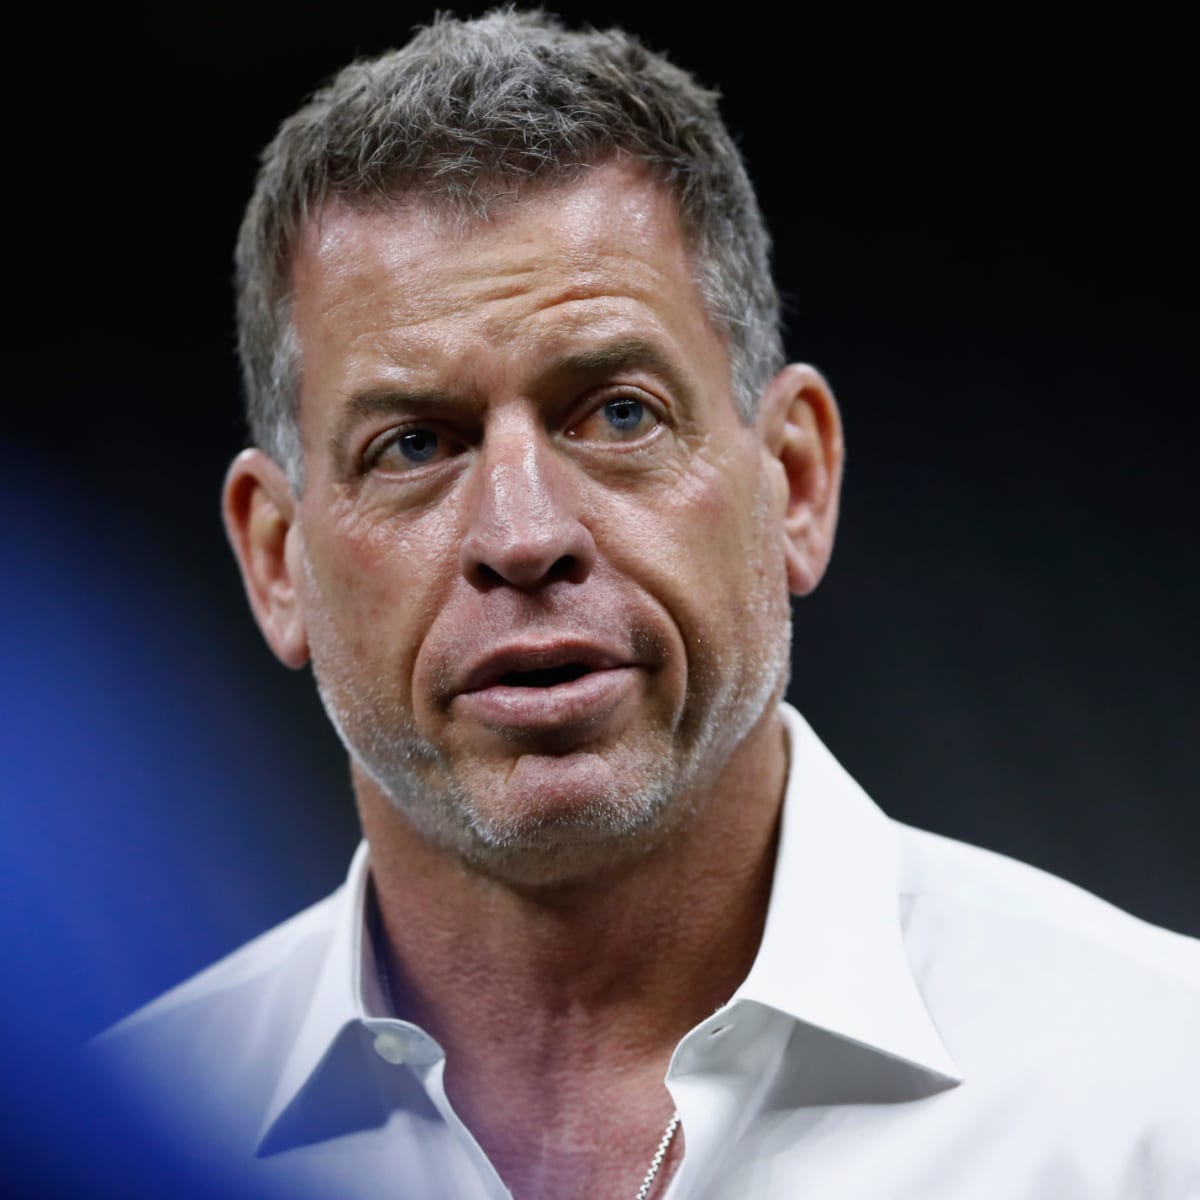 Troy Aikman pens Jimmy Johnson tribute after Hall of Fame announcement